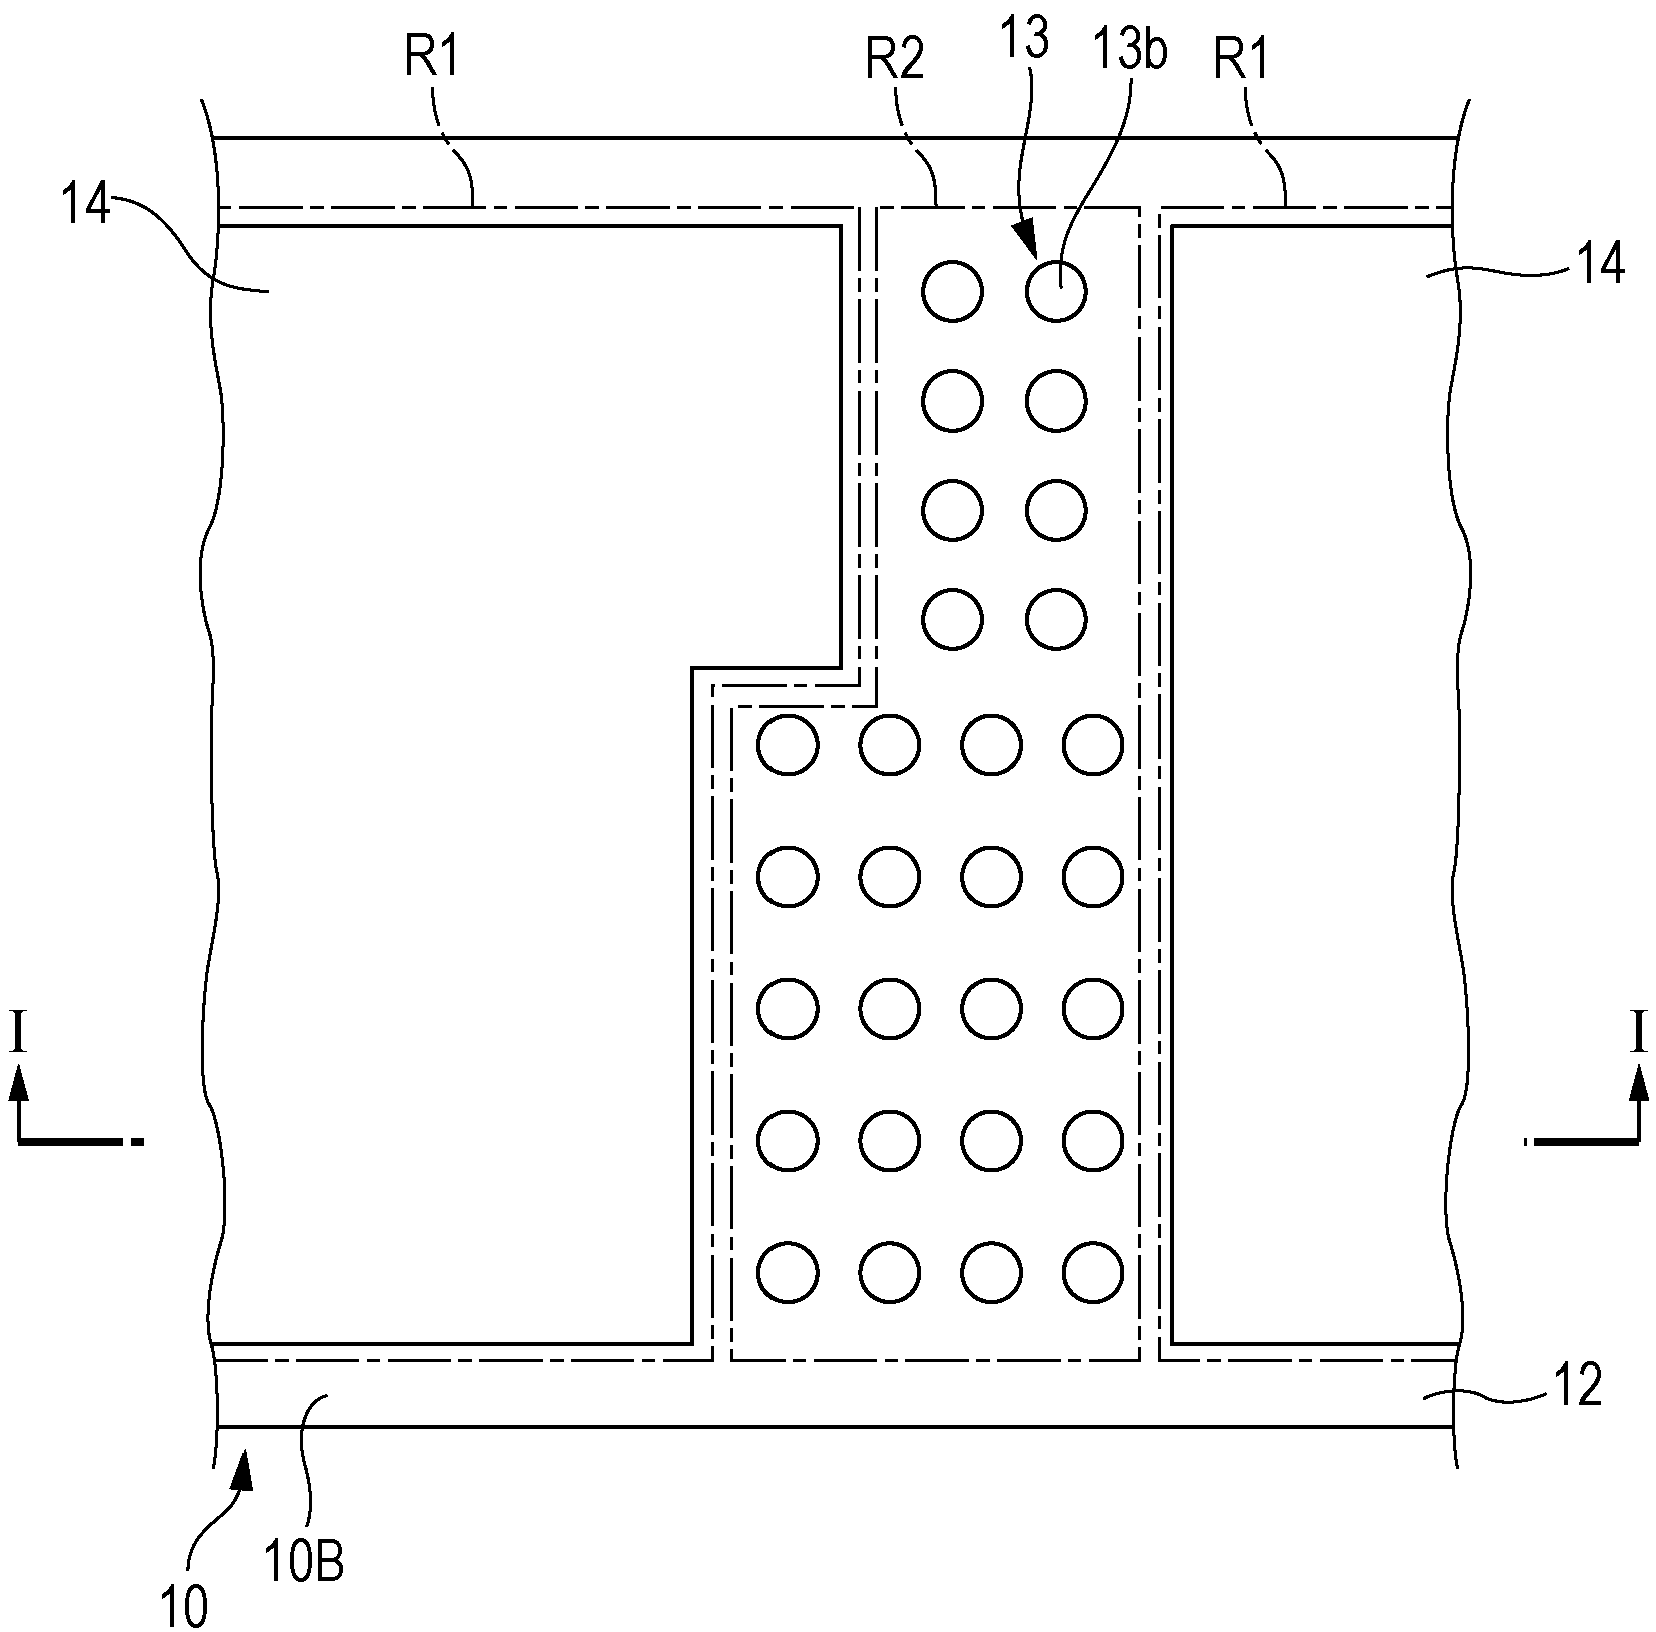 A method of manufacturing a multilayer circuit board and the multilayer circuit board